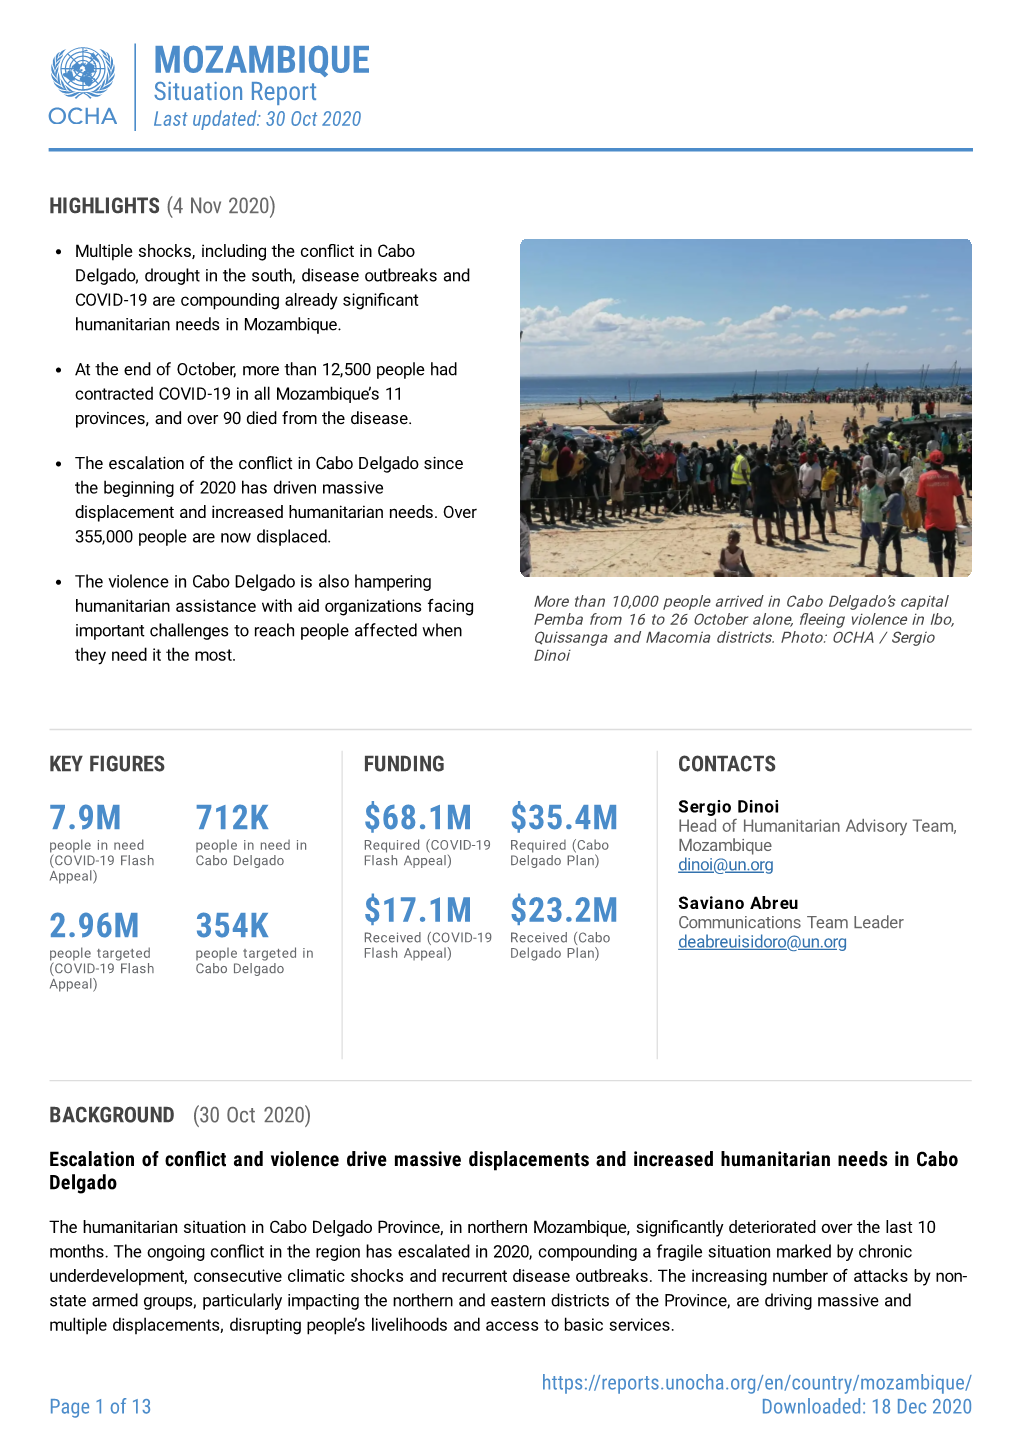 MOZAMBIQUE Situation Report Last Updated: 30 Oct 2020